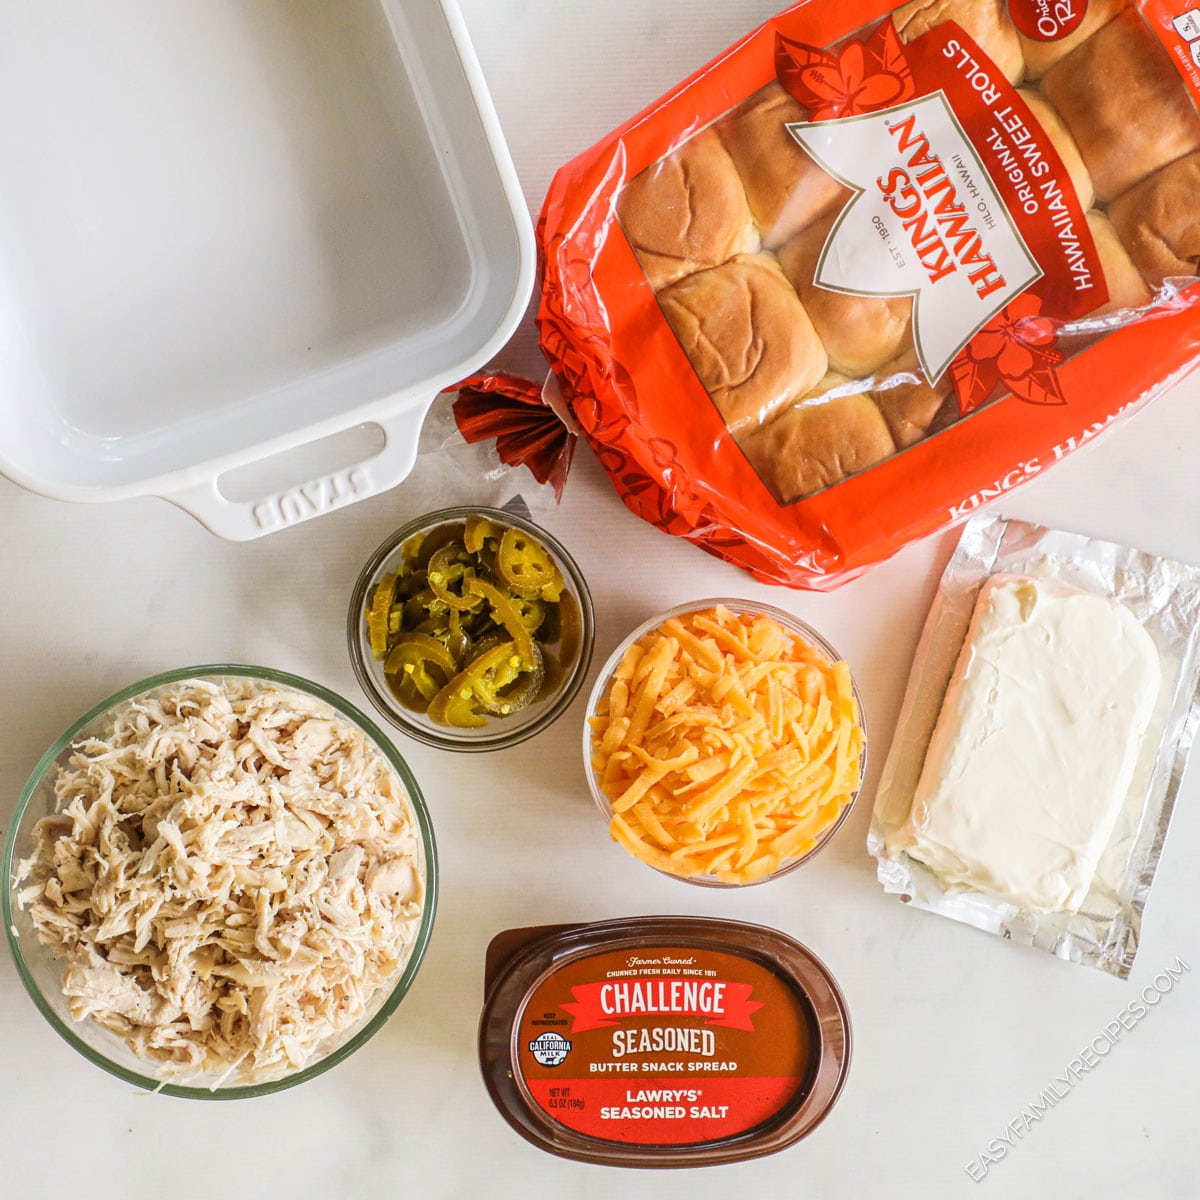 Ingredients to make Jalapeno Popper Sliders- cream cheese, shredded chicken, jalapeno peppers, cheddar cheese, lowerys seasoning salt, challenge butter